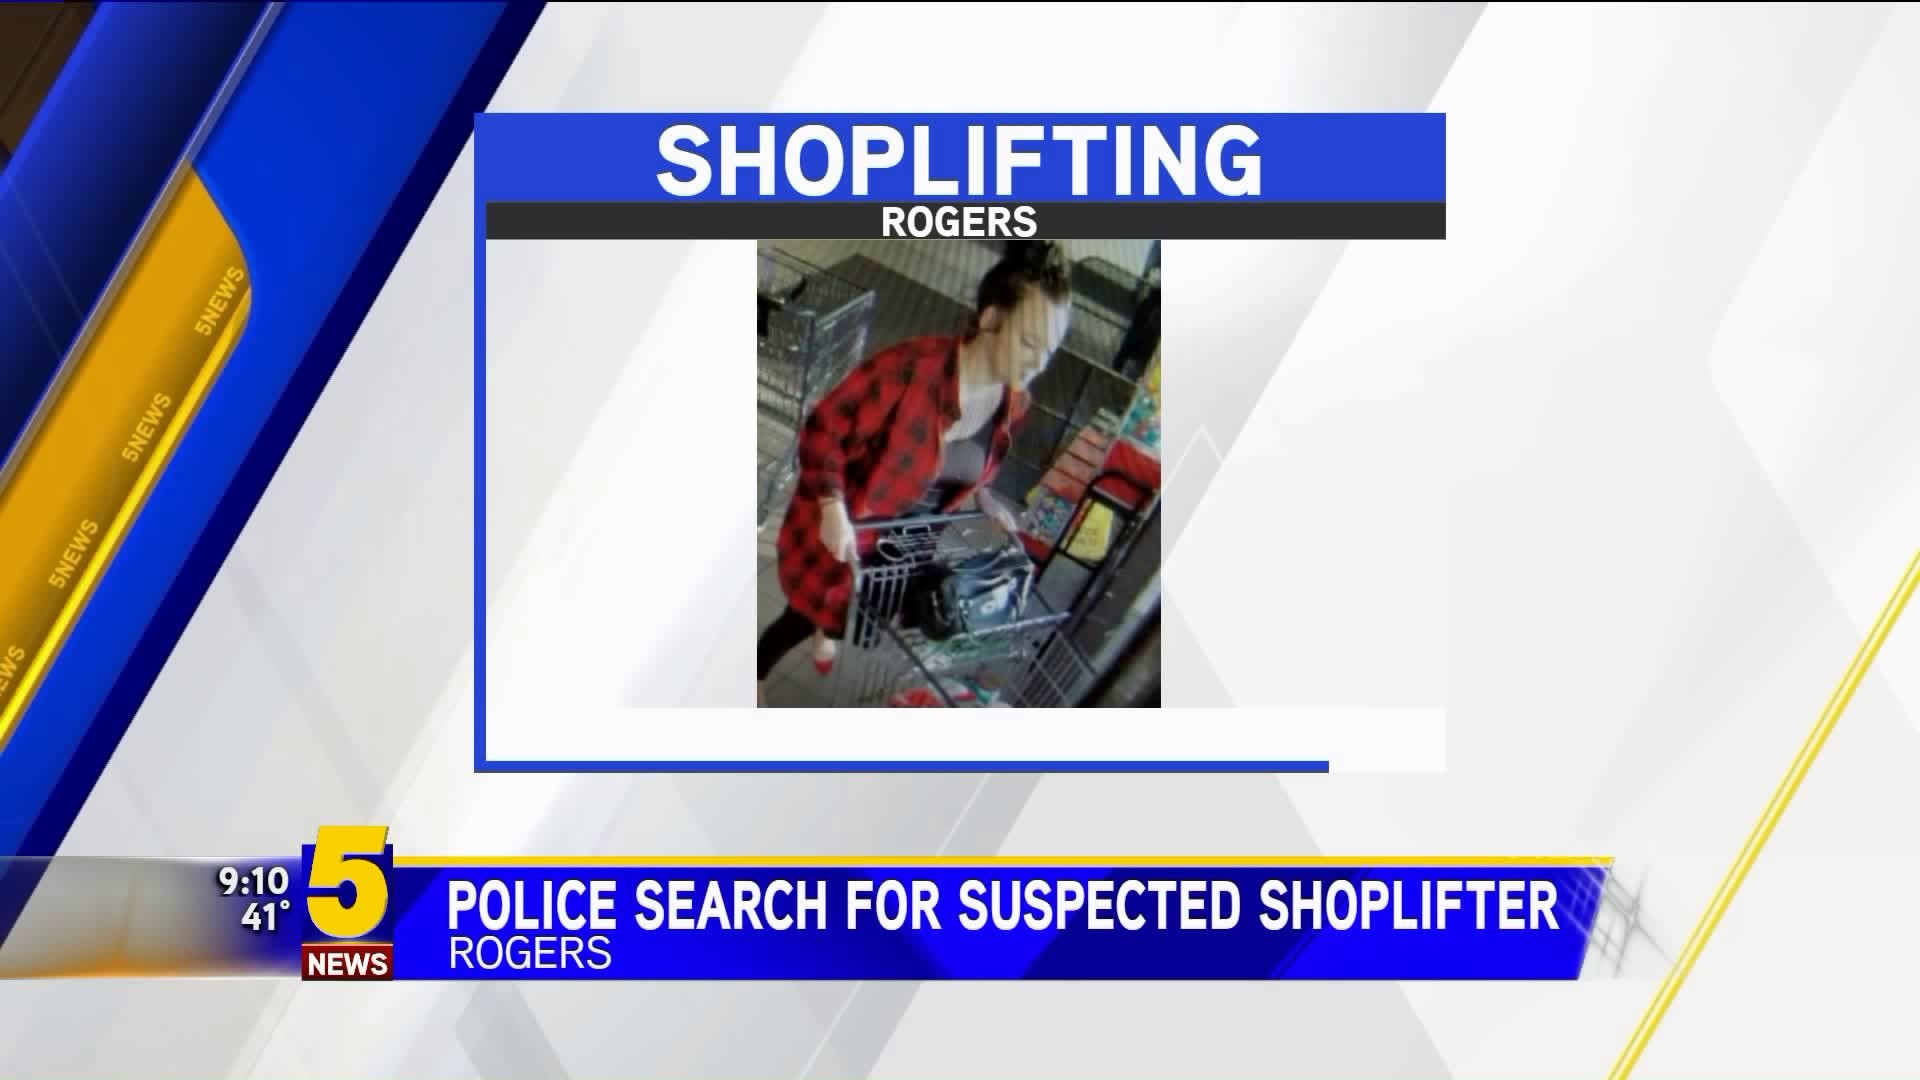 Police search for suspected shoplifter in rogers